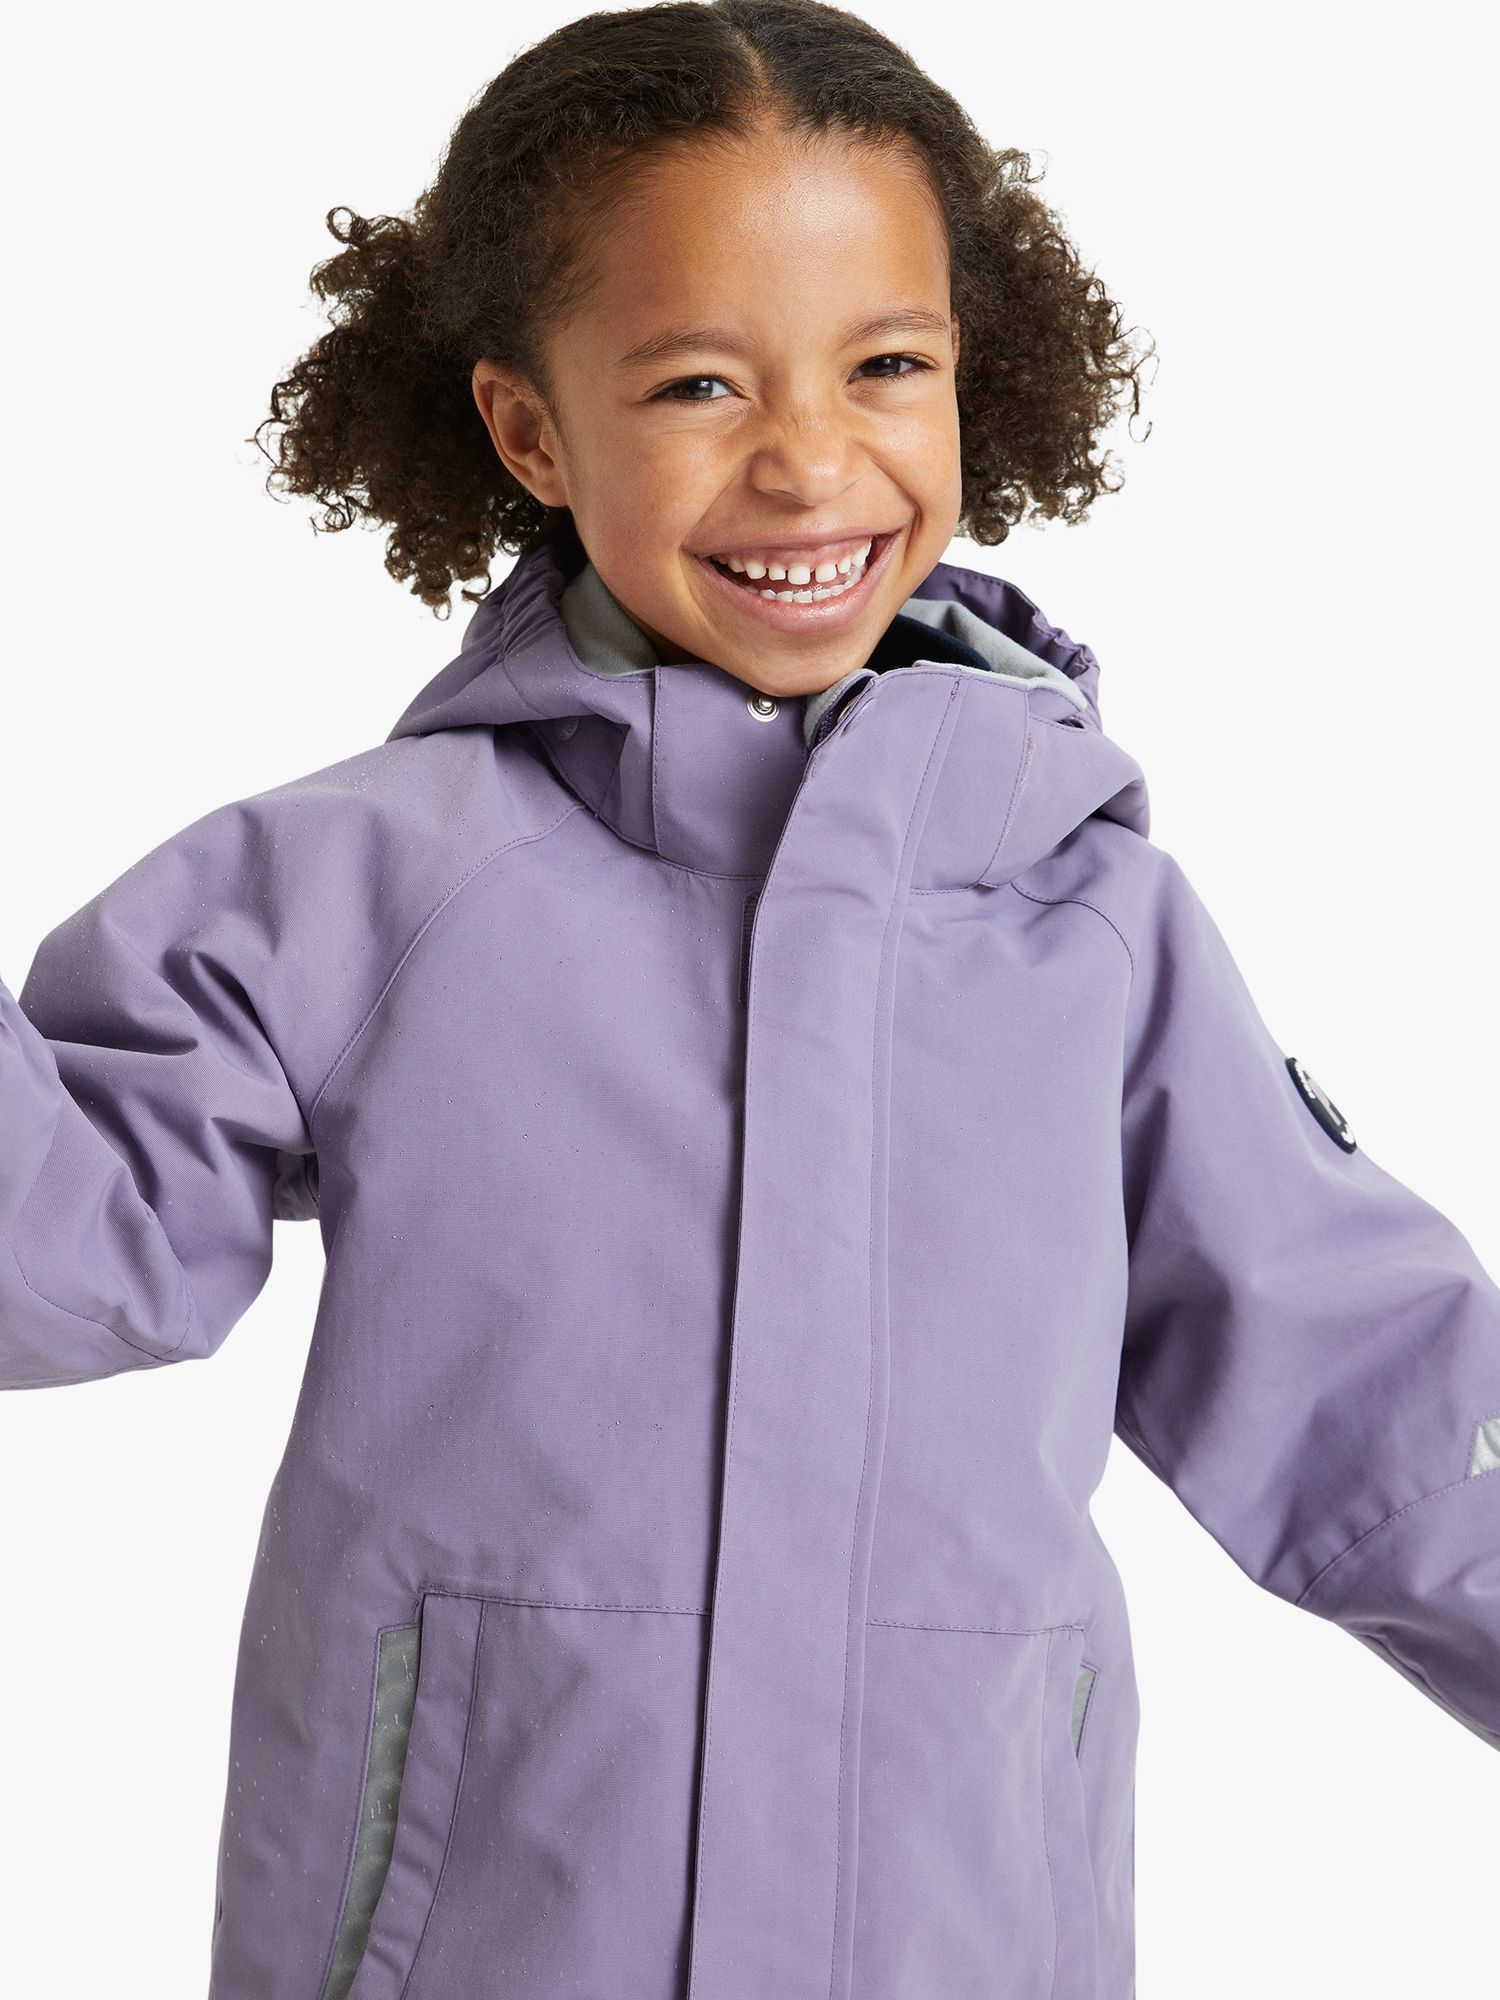 Buy Polarn O. Pyret Kids' Recycled Waterproof Shell Hooded Coat Online at johnlewis.com